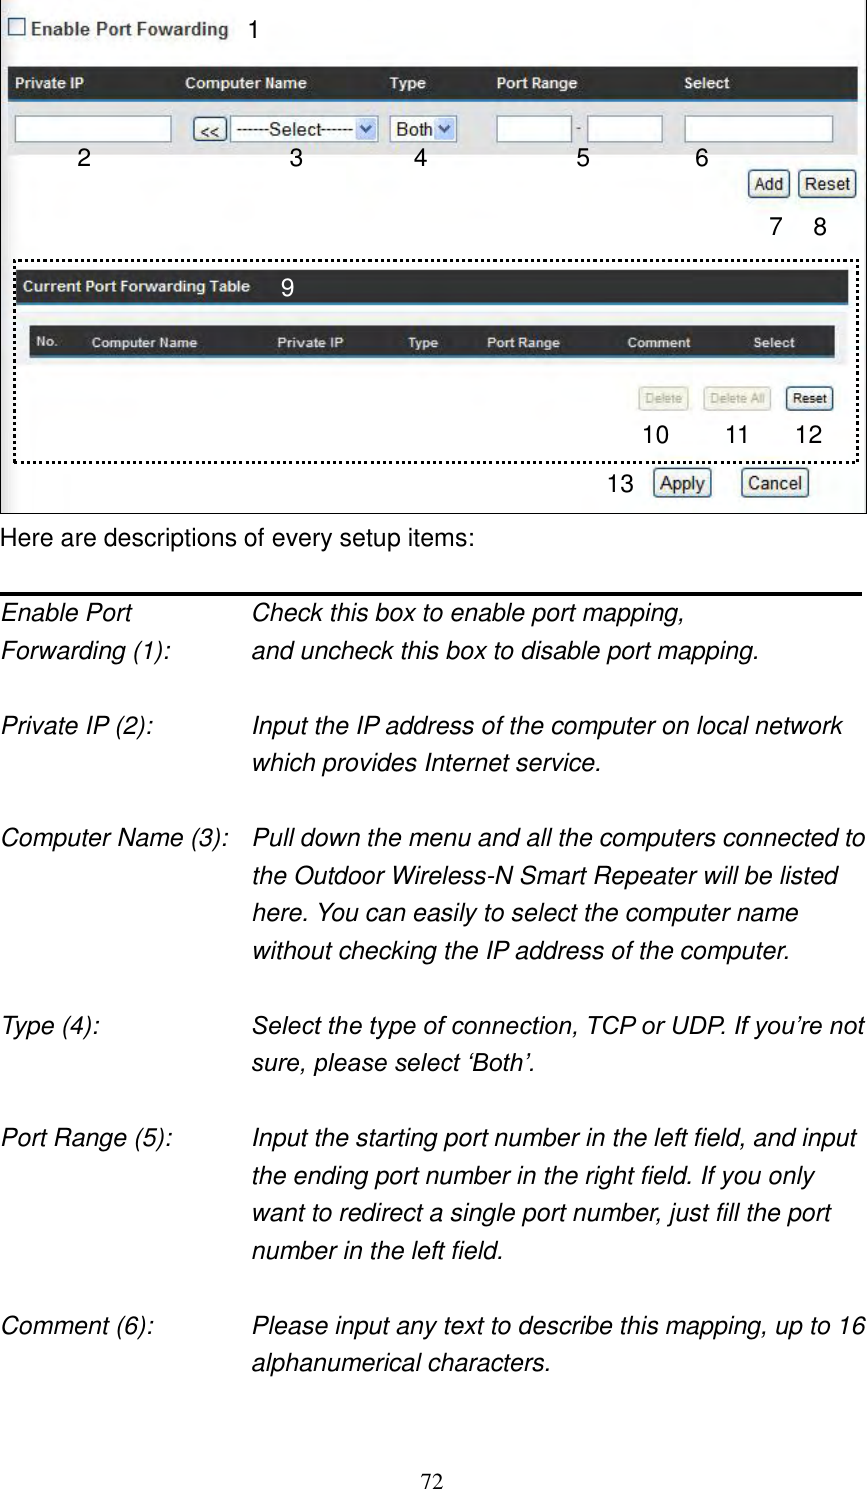 72 Here are descriptions of every setup items:  Enable Port       Check this box to enable port mapping, Forwarding (1):      and uncheck this box to disable port mapping.  Private IP (2):    Input the IP address of the computer on local network which provides Internet service.  Computer Name (3):  Pull down the menu and all the computers connected to the Outdoor Wireless-N Smart Repeater will be listed here. You can easily to select the computer name without checking the IP address of the computer.  Type (4):   Select the type of connection, TCP or UDP. If you‟re not sure, please select „Both‟.  Port Range (5):    Input the starting port number in the left field, and input the ending port number in the right field. If you only want to redirect a single port number, just fill the port number in the left field.  Comment (6):    Please input any text to describe this mapping, up to 16 alphanumerical characters.  1 3 4 5 6 7 8 9 11 12 13 2 10 